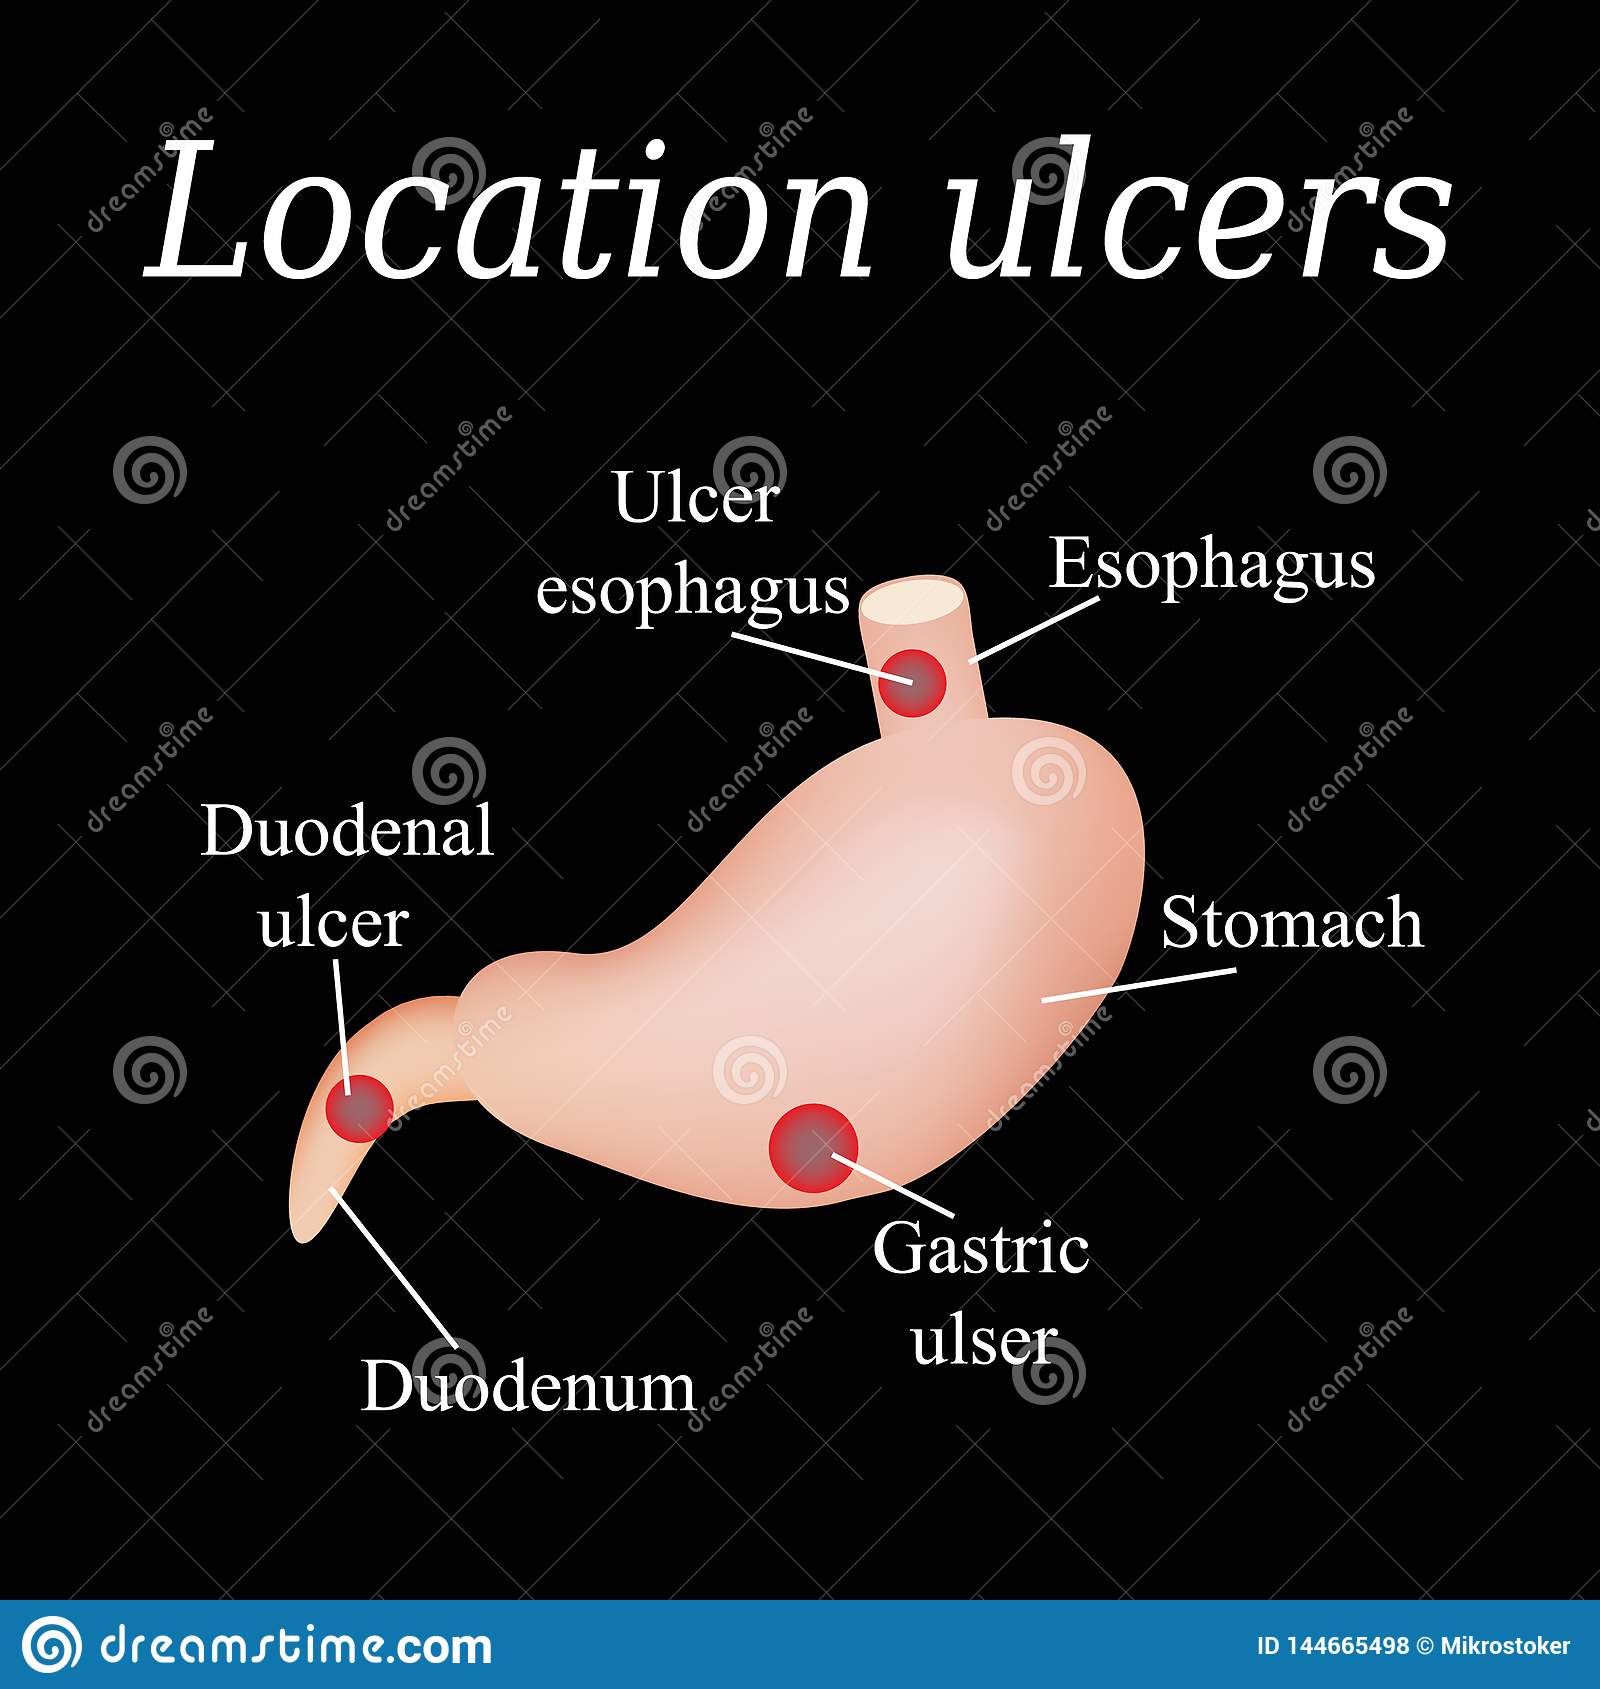 Esophagus Ulcer Affected. Ulcer of Esophagus. Stomach Ulcer Affected ...